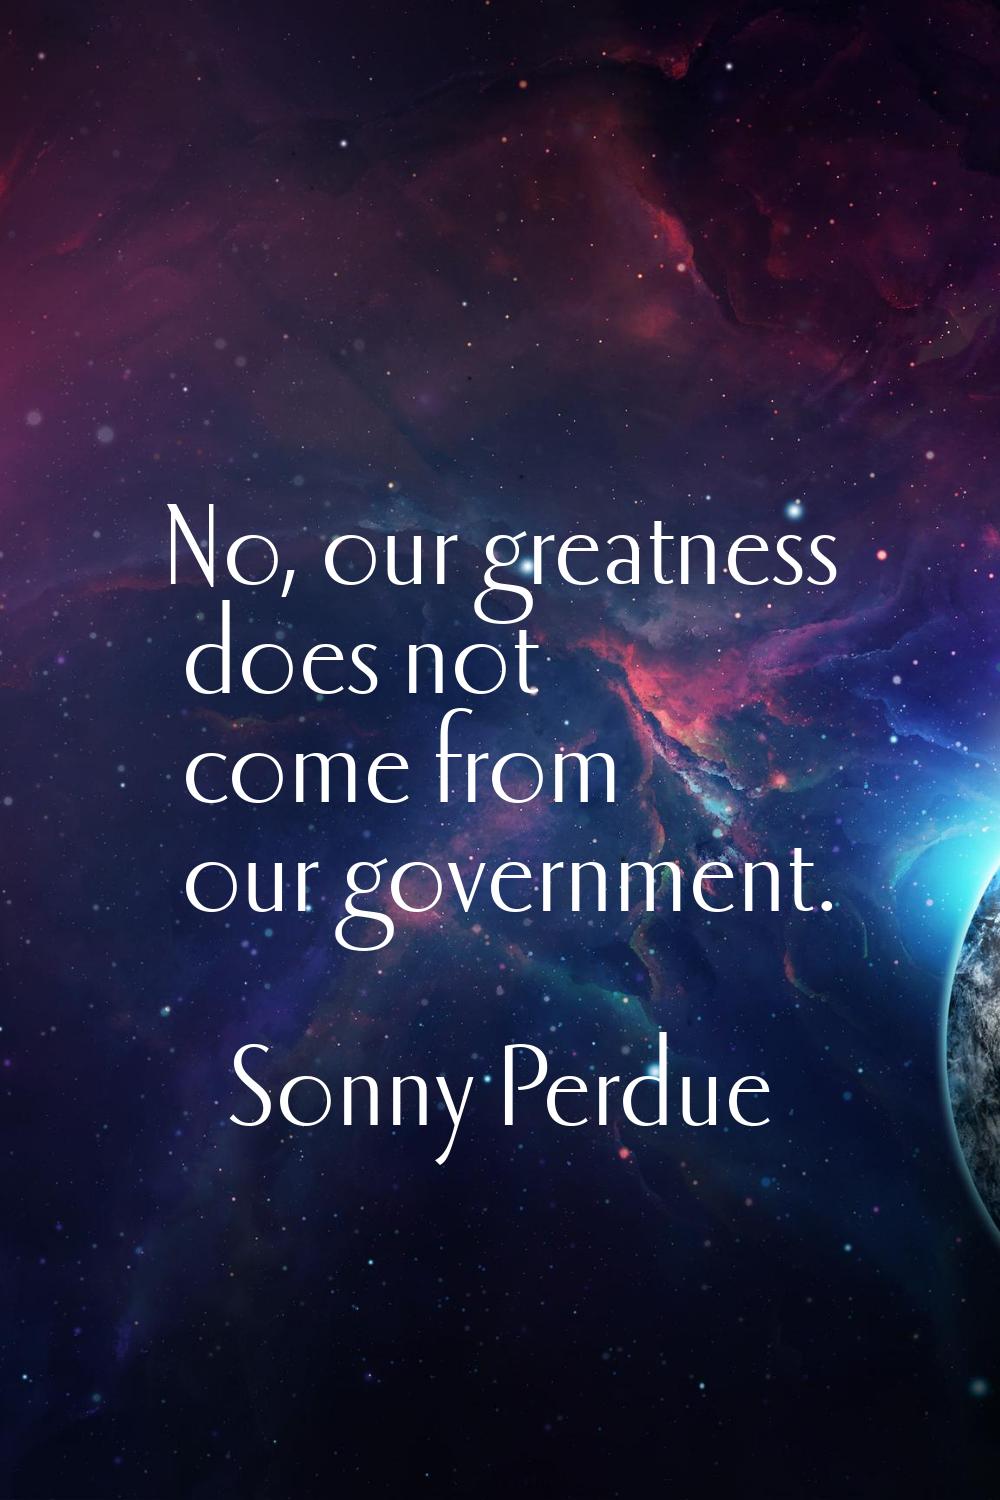 No, our greatness does not come from our government.